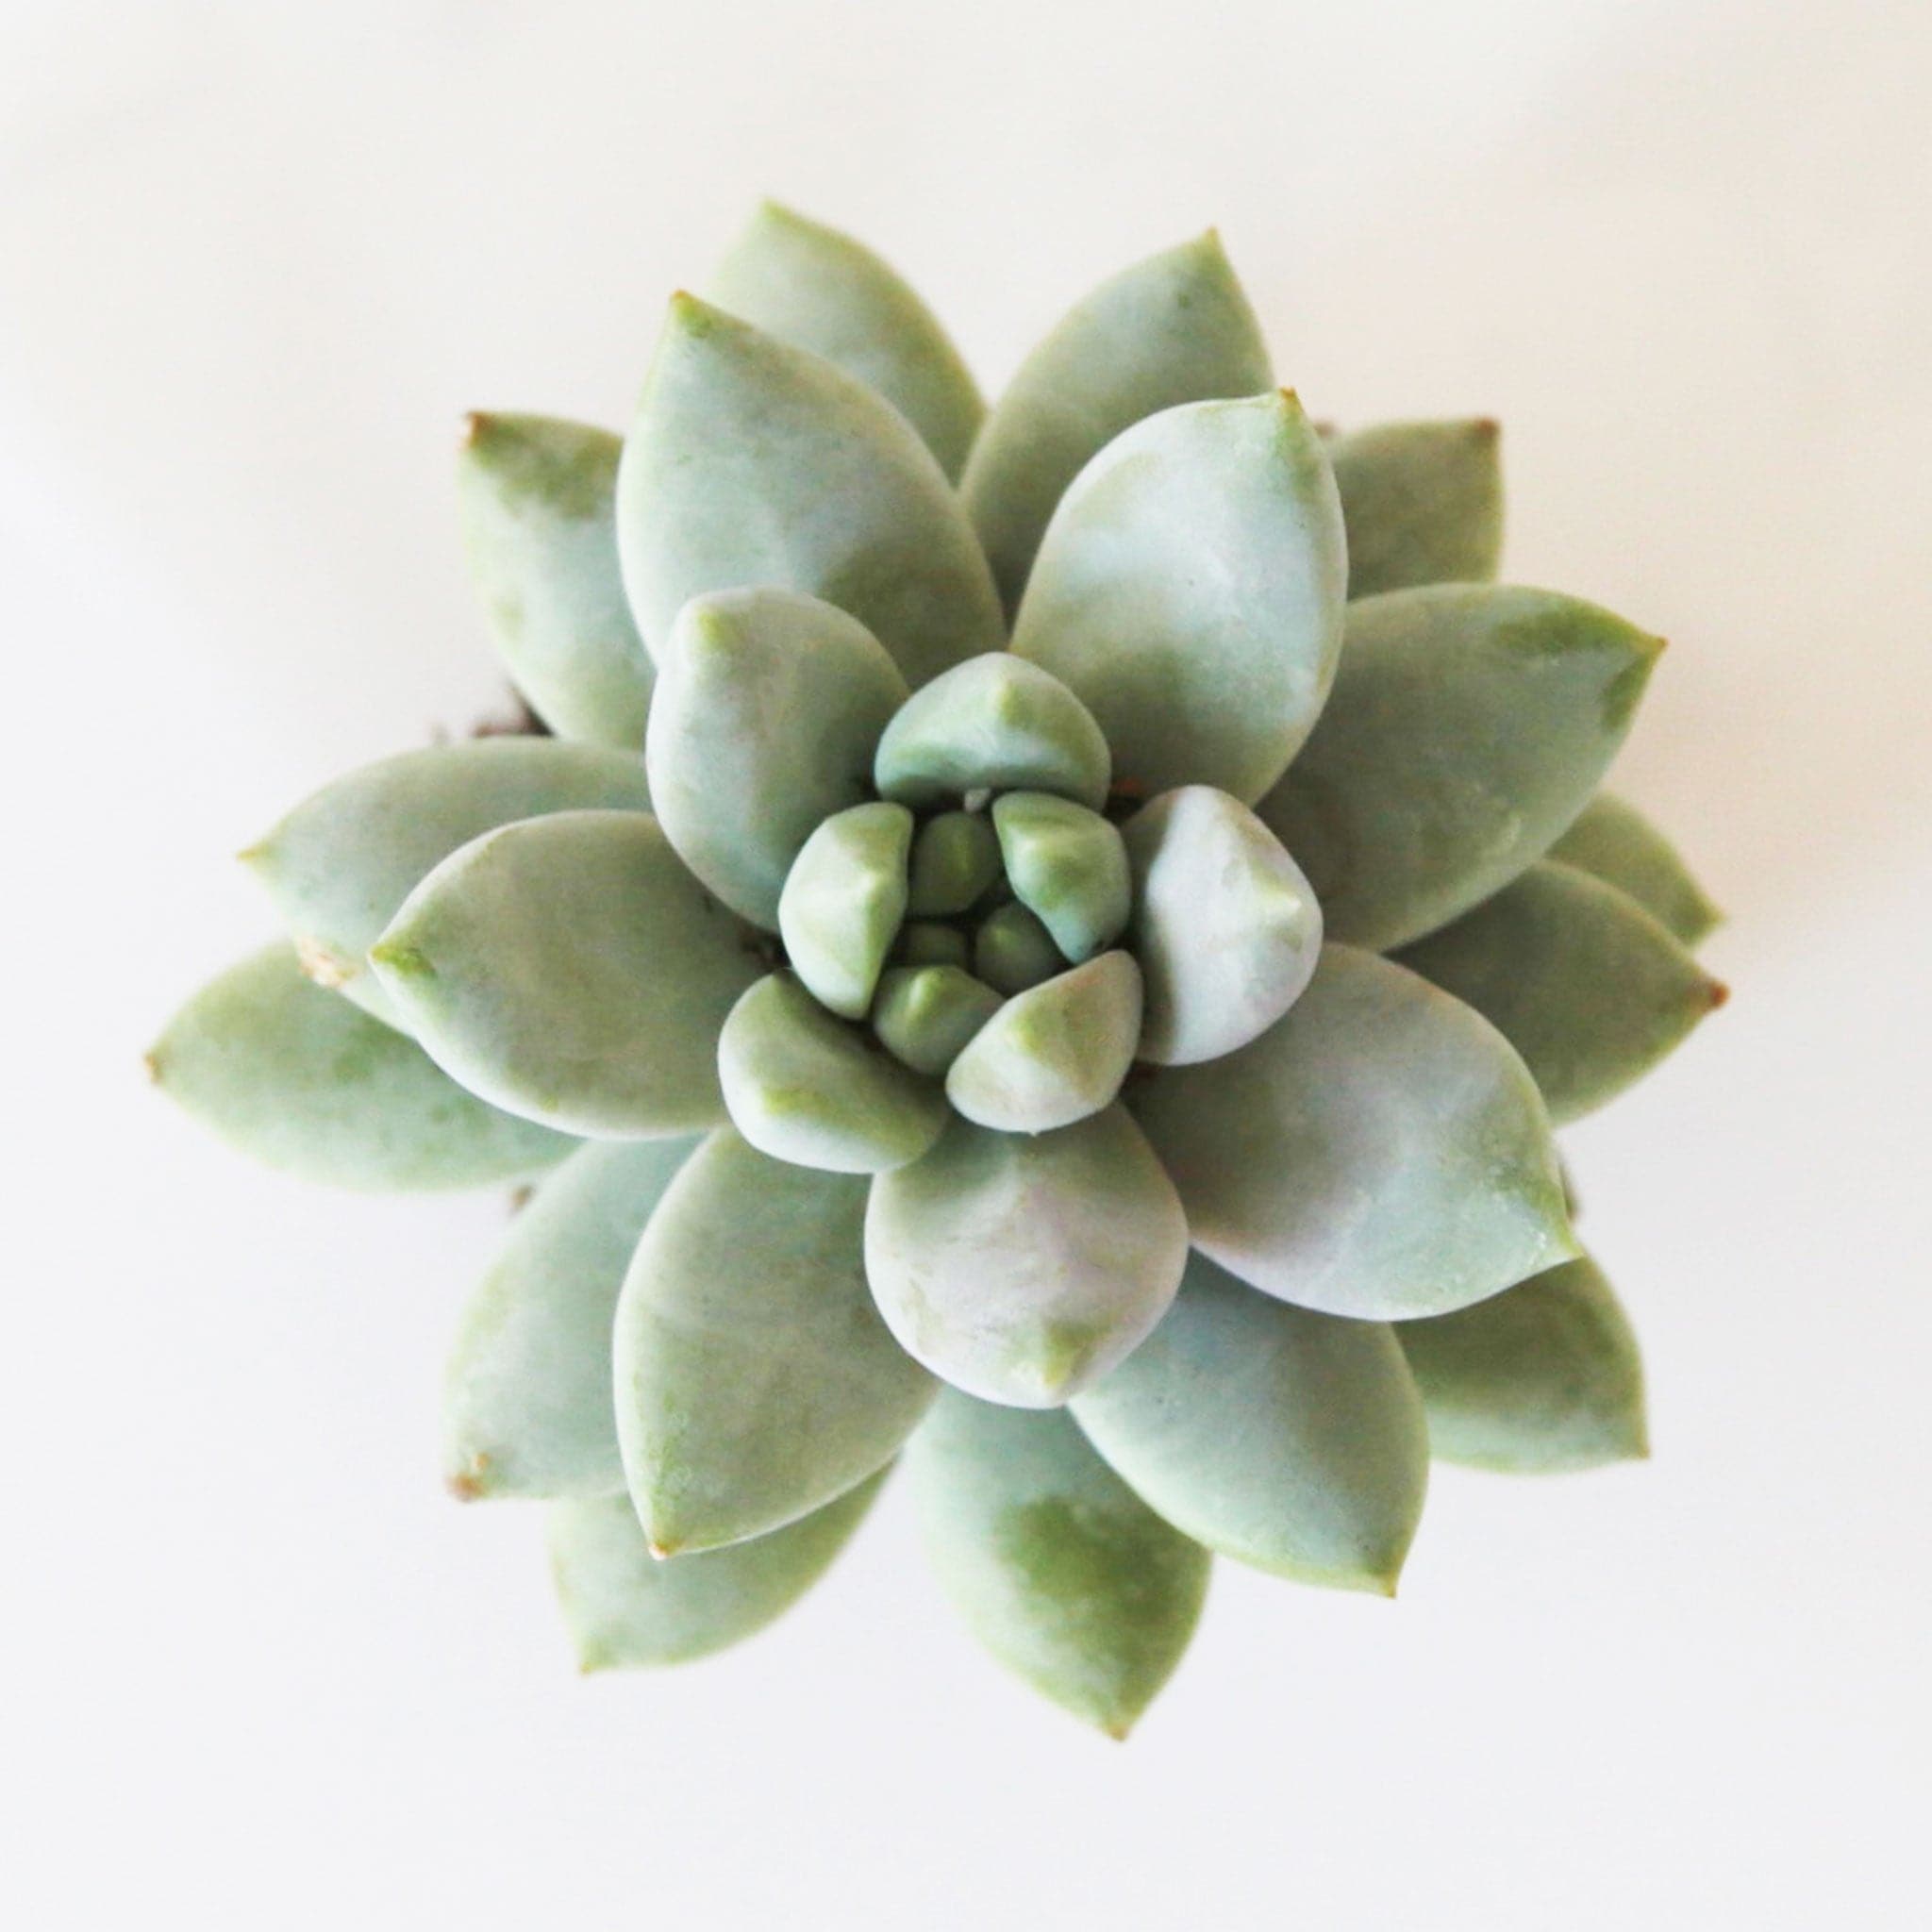 In font of a white background is a succulent with the top facing forward. The succulent is six layers of sage green petals.